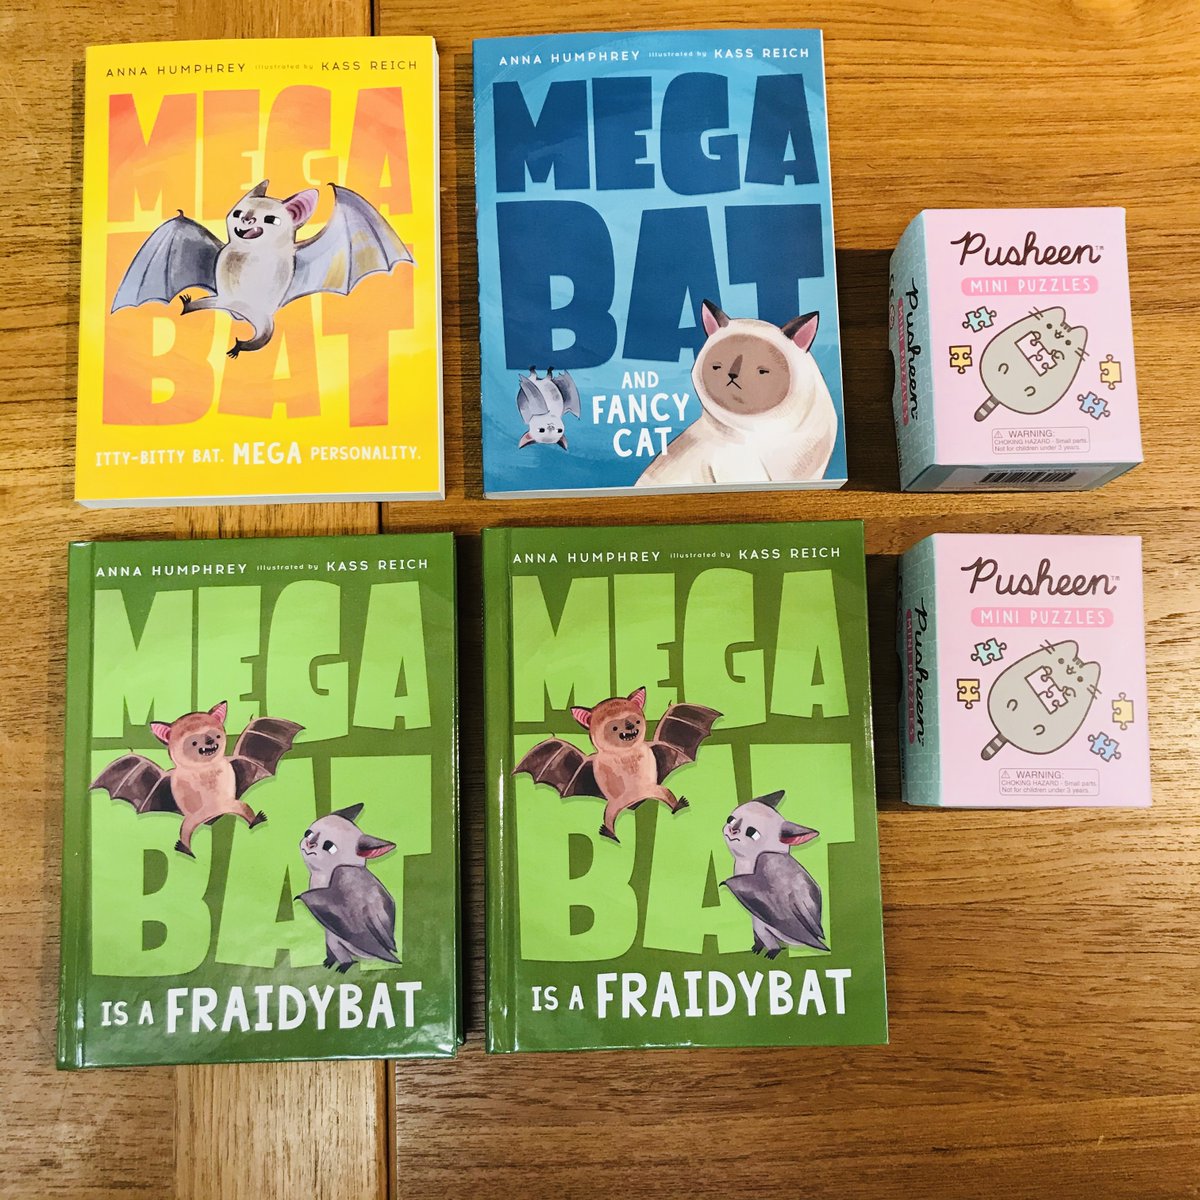 New in first chapter:MEGABAT IS FRAIDYBAT by  @Anna_Humphrey, illus by Kass Reich! Plus the first two MEGABAT books out in paperback!Also some super cute Pusheen mini puzzles illustrated by Claire Belton!